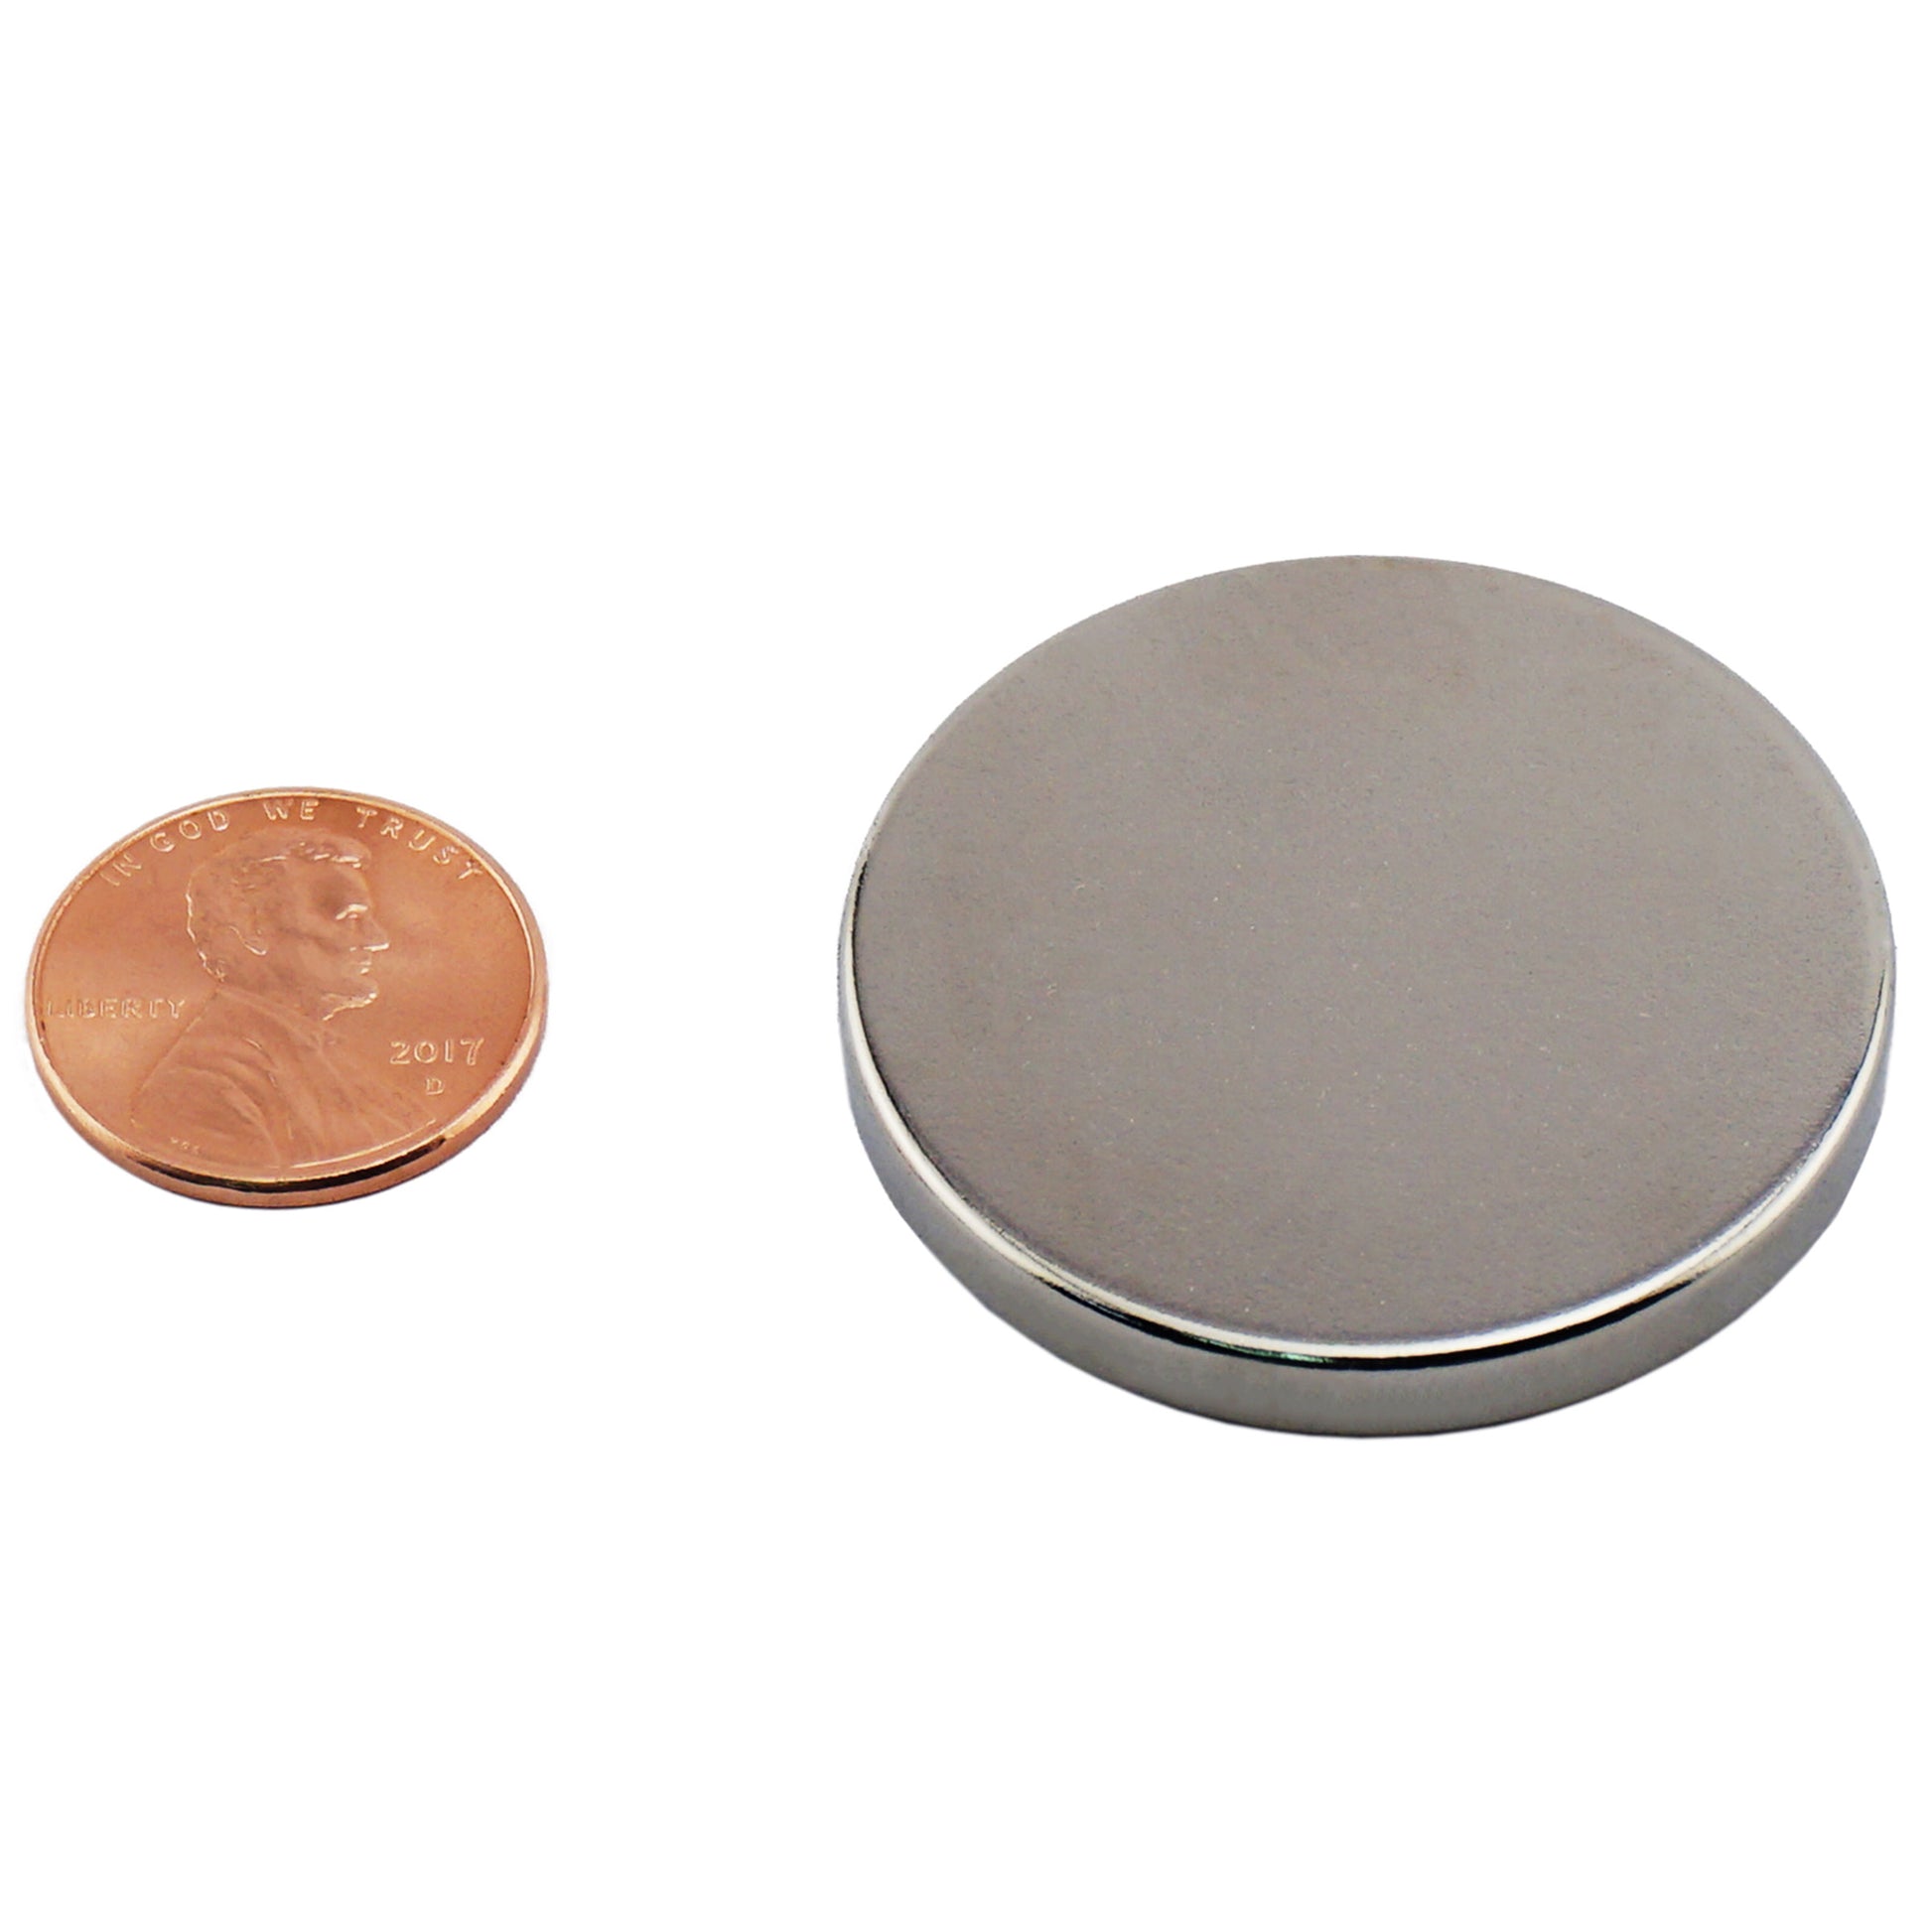 Load image into Gallery viewer, ND015006N Neodymium Disc Magnet - Compared to Penny for Size Reference